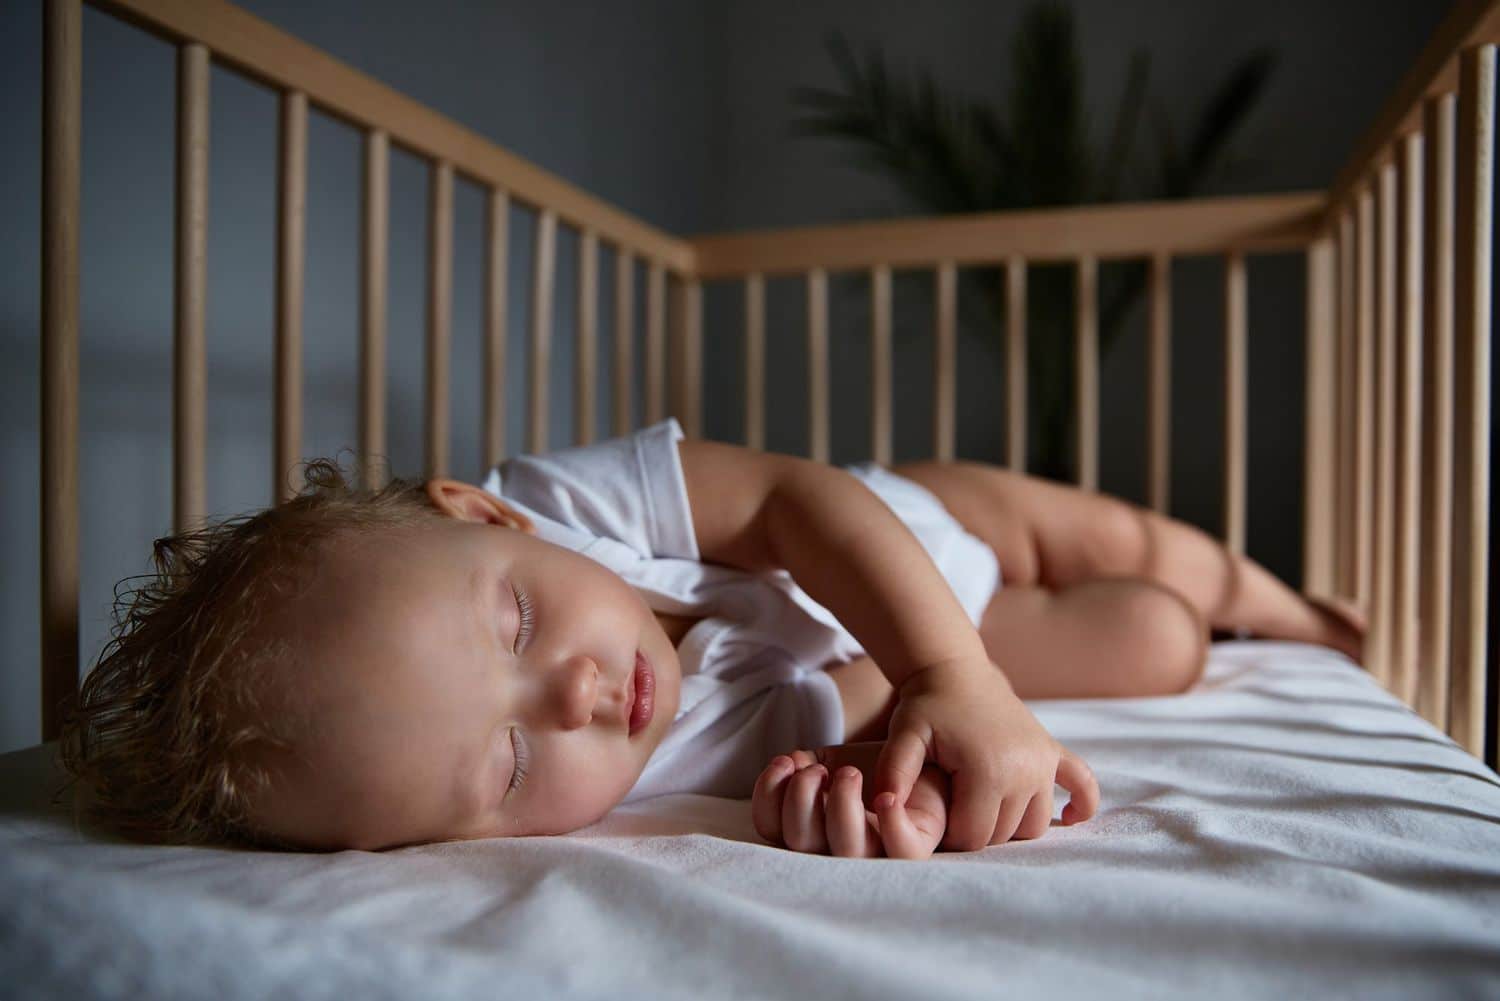 A peacefully sleeping baby in a crib, surrounded by a serene and ideal sleeping environment